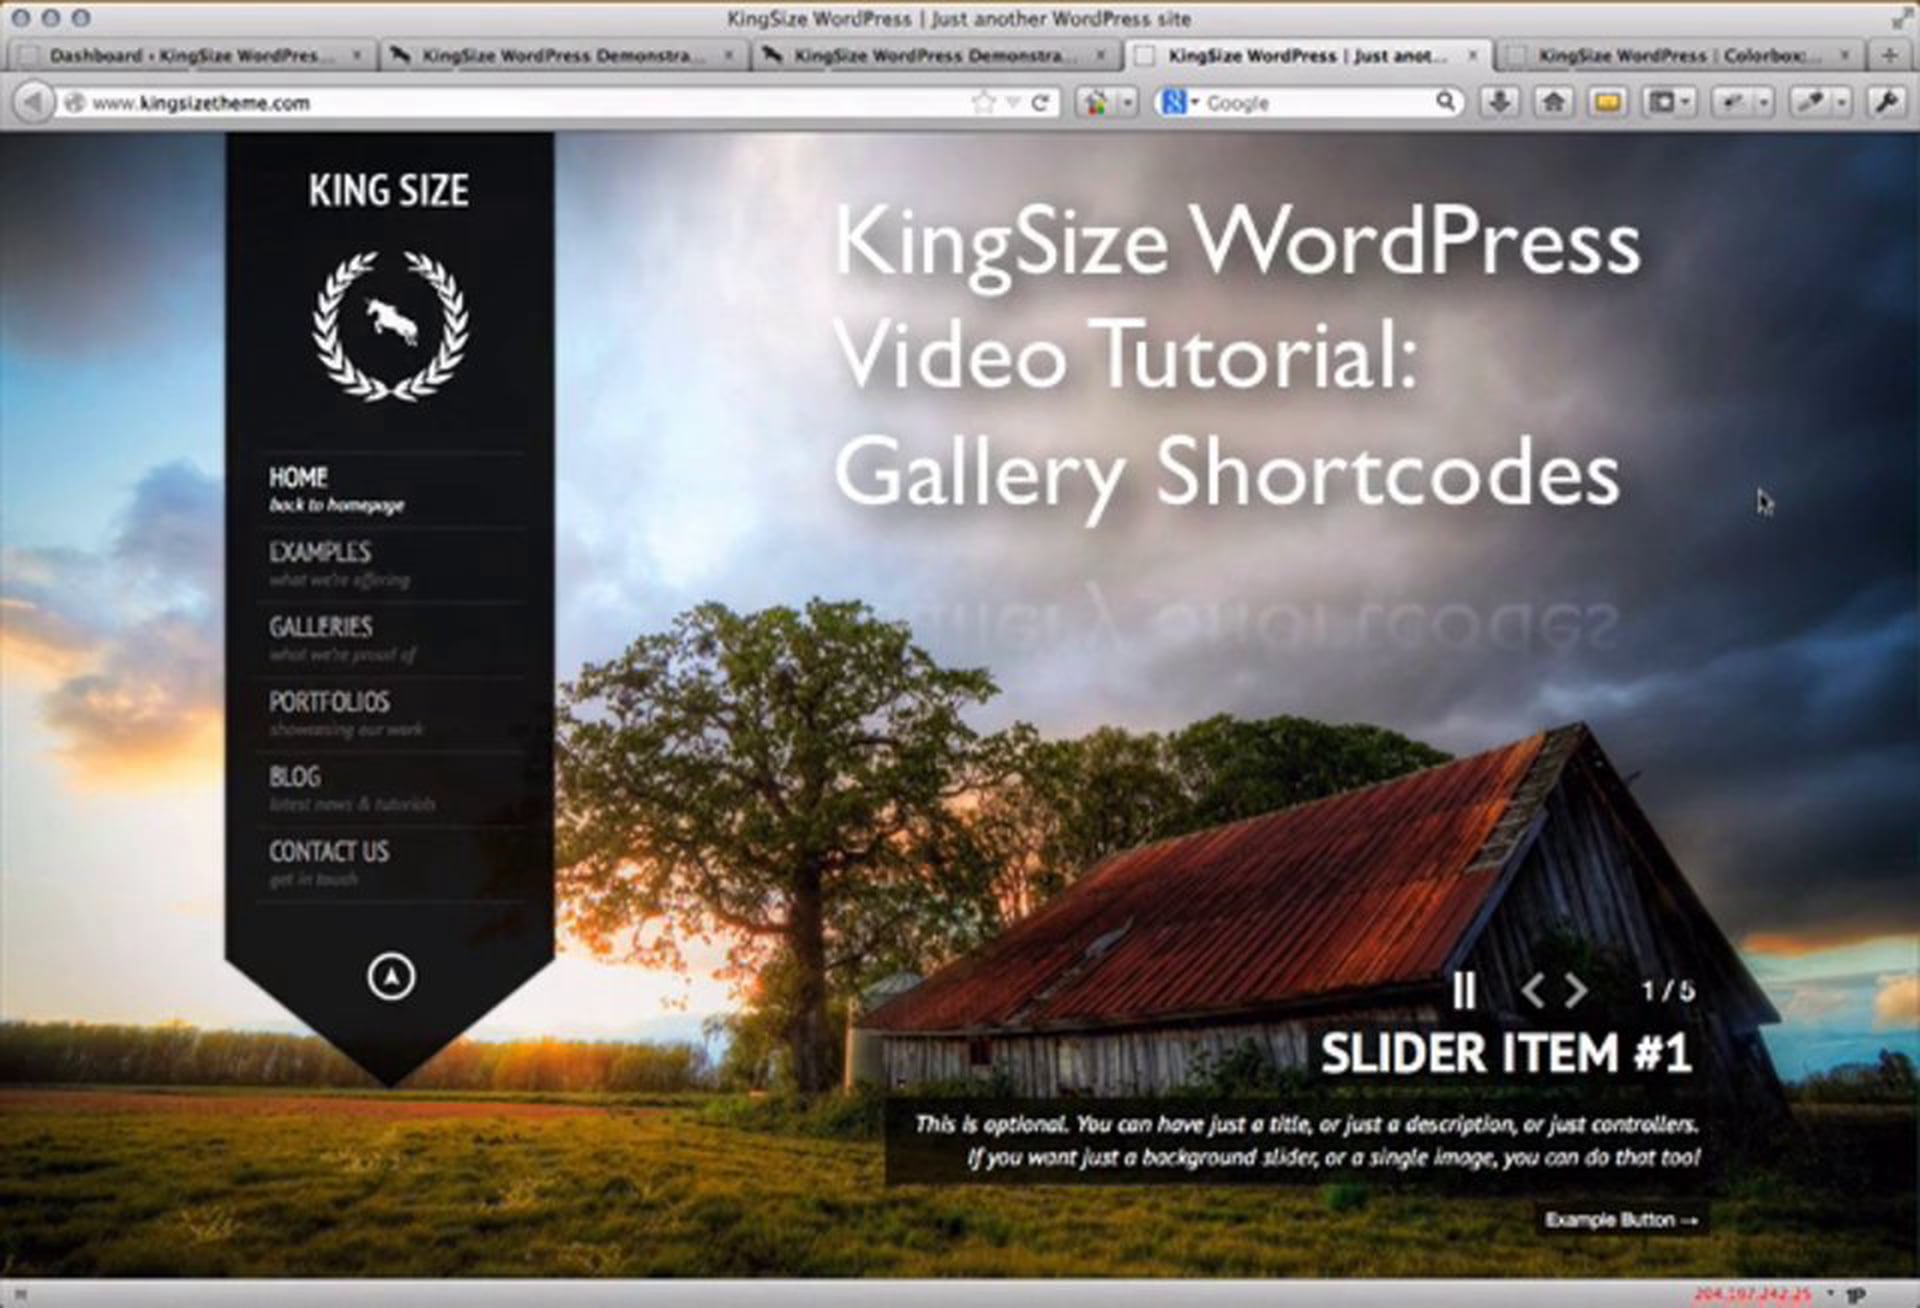 7. KingSize WordPress: Creating Galleries with Shortcodes